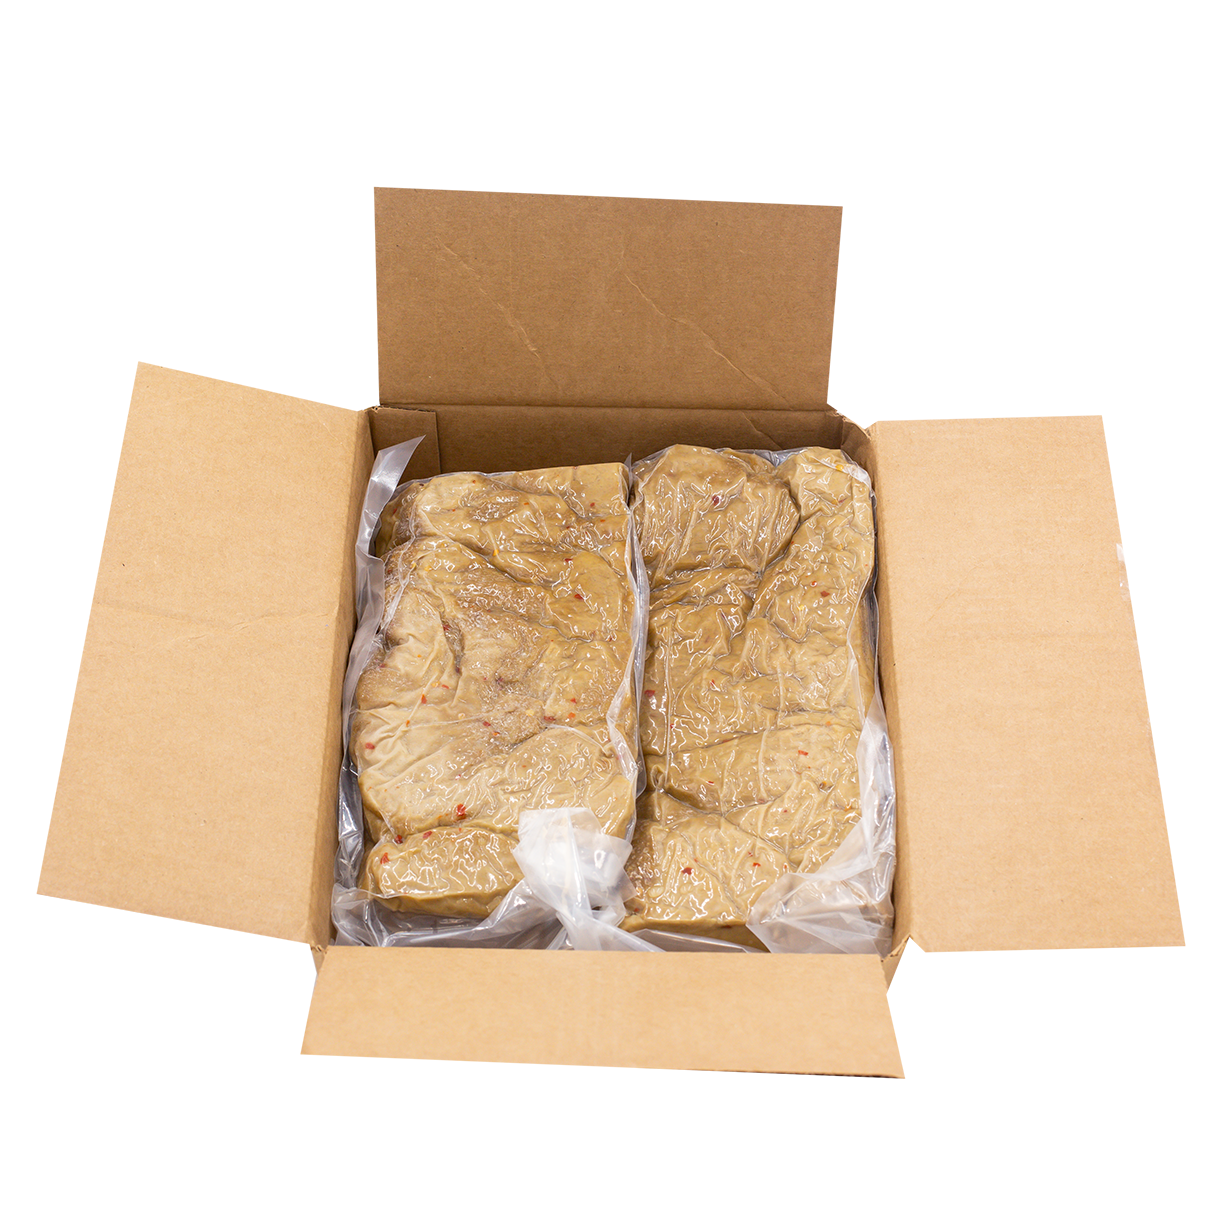 Bulk Vegan Wing Meat for Restaurants and Food Service - 10 LBS